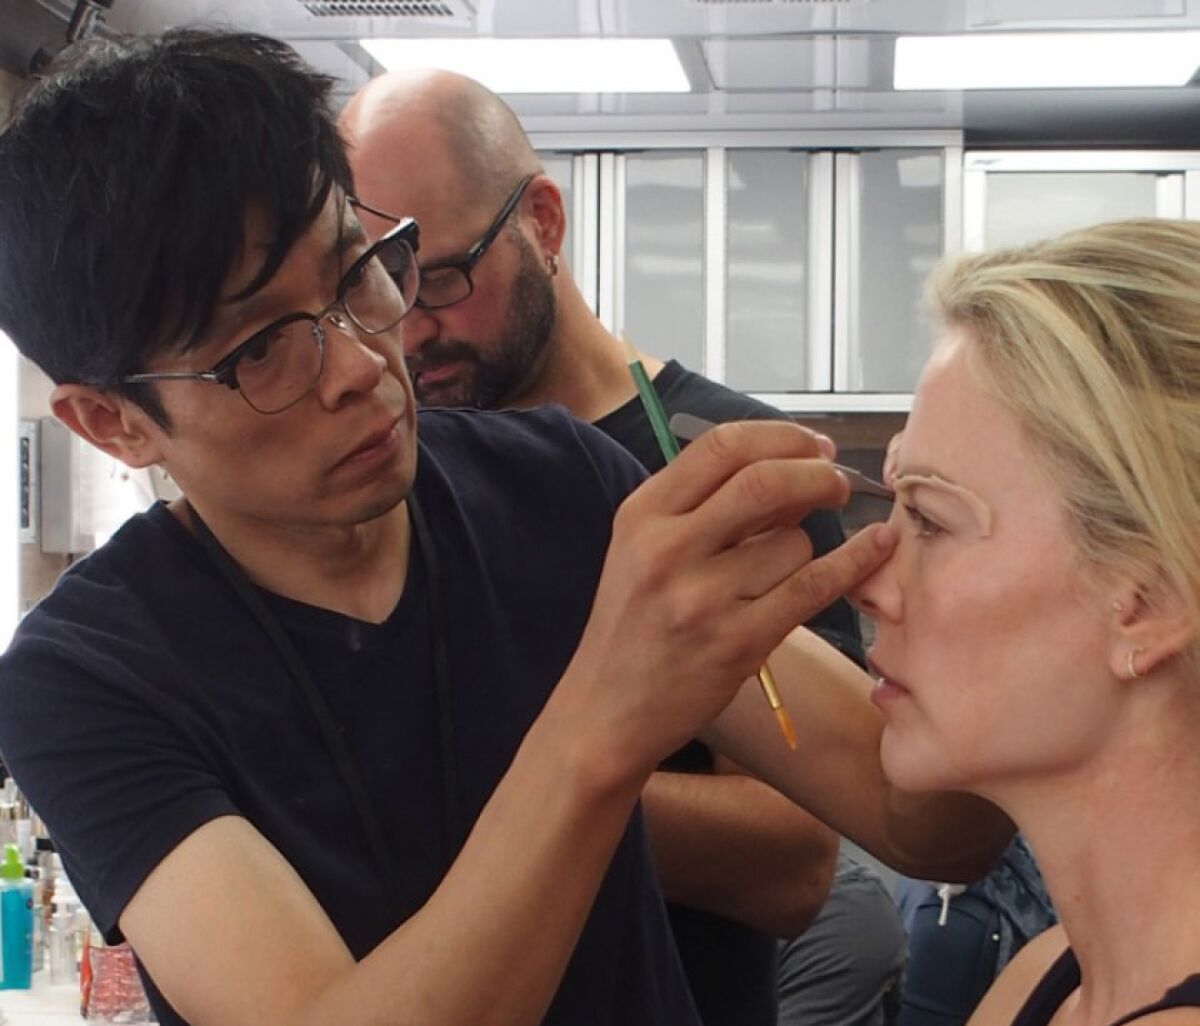 Charlize Theron gets her eyelids worked on by prosthetic designer Kazu Hiro to transform into Fox News anchor Megyn Kelly for “Bombshell.” Hiro, Anne Morgan and Vivian Baker have been nominated for an Oscar for best achievement in makeup and hairstyling for their work on the film.